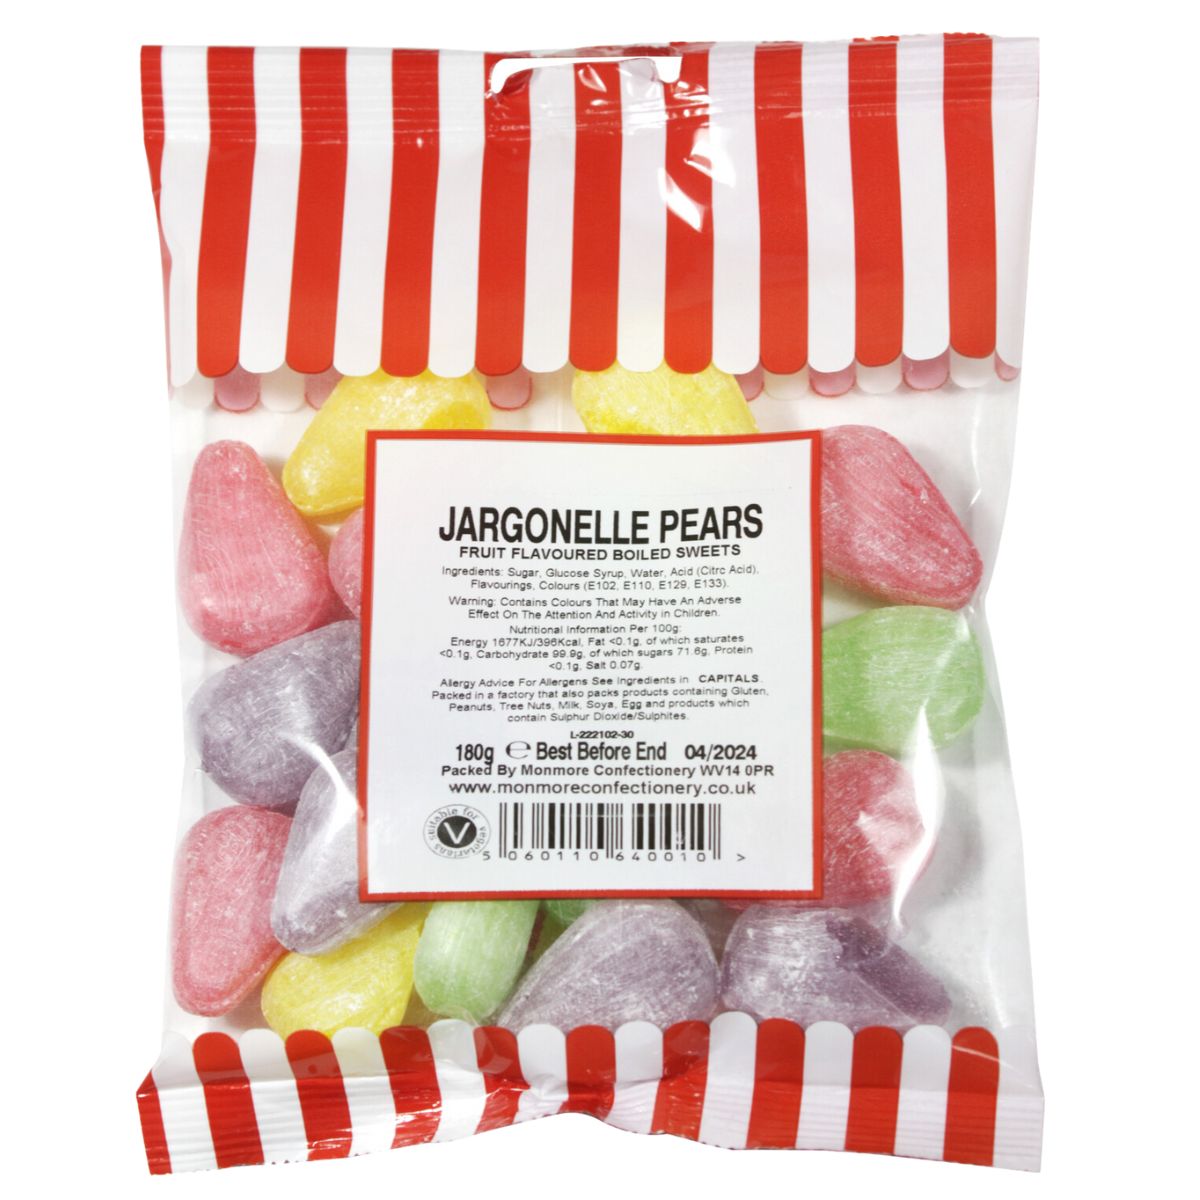 A bumper bag of Jargonelle Pear Drops - 140g in a red and white striped bag.